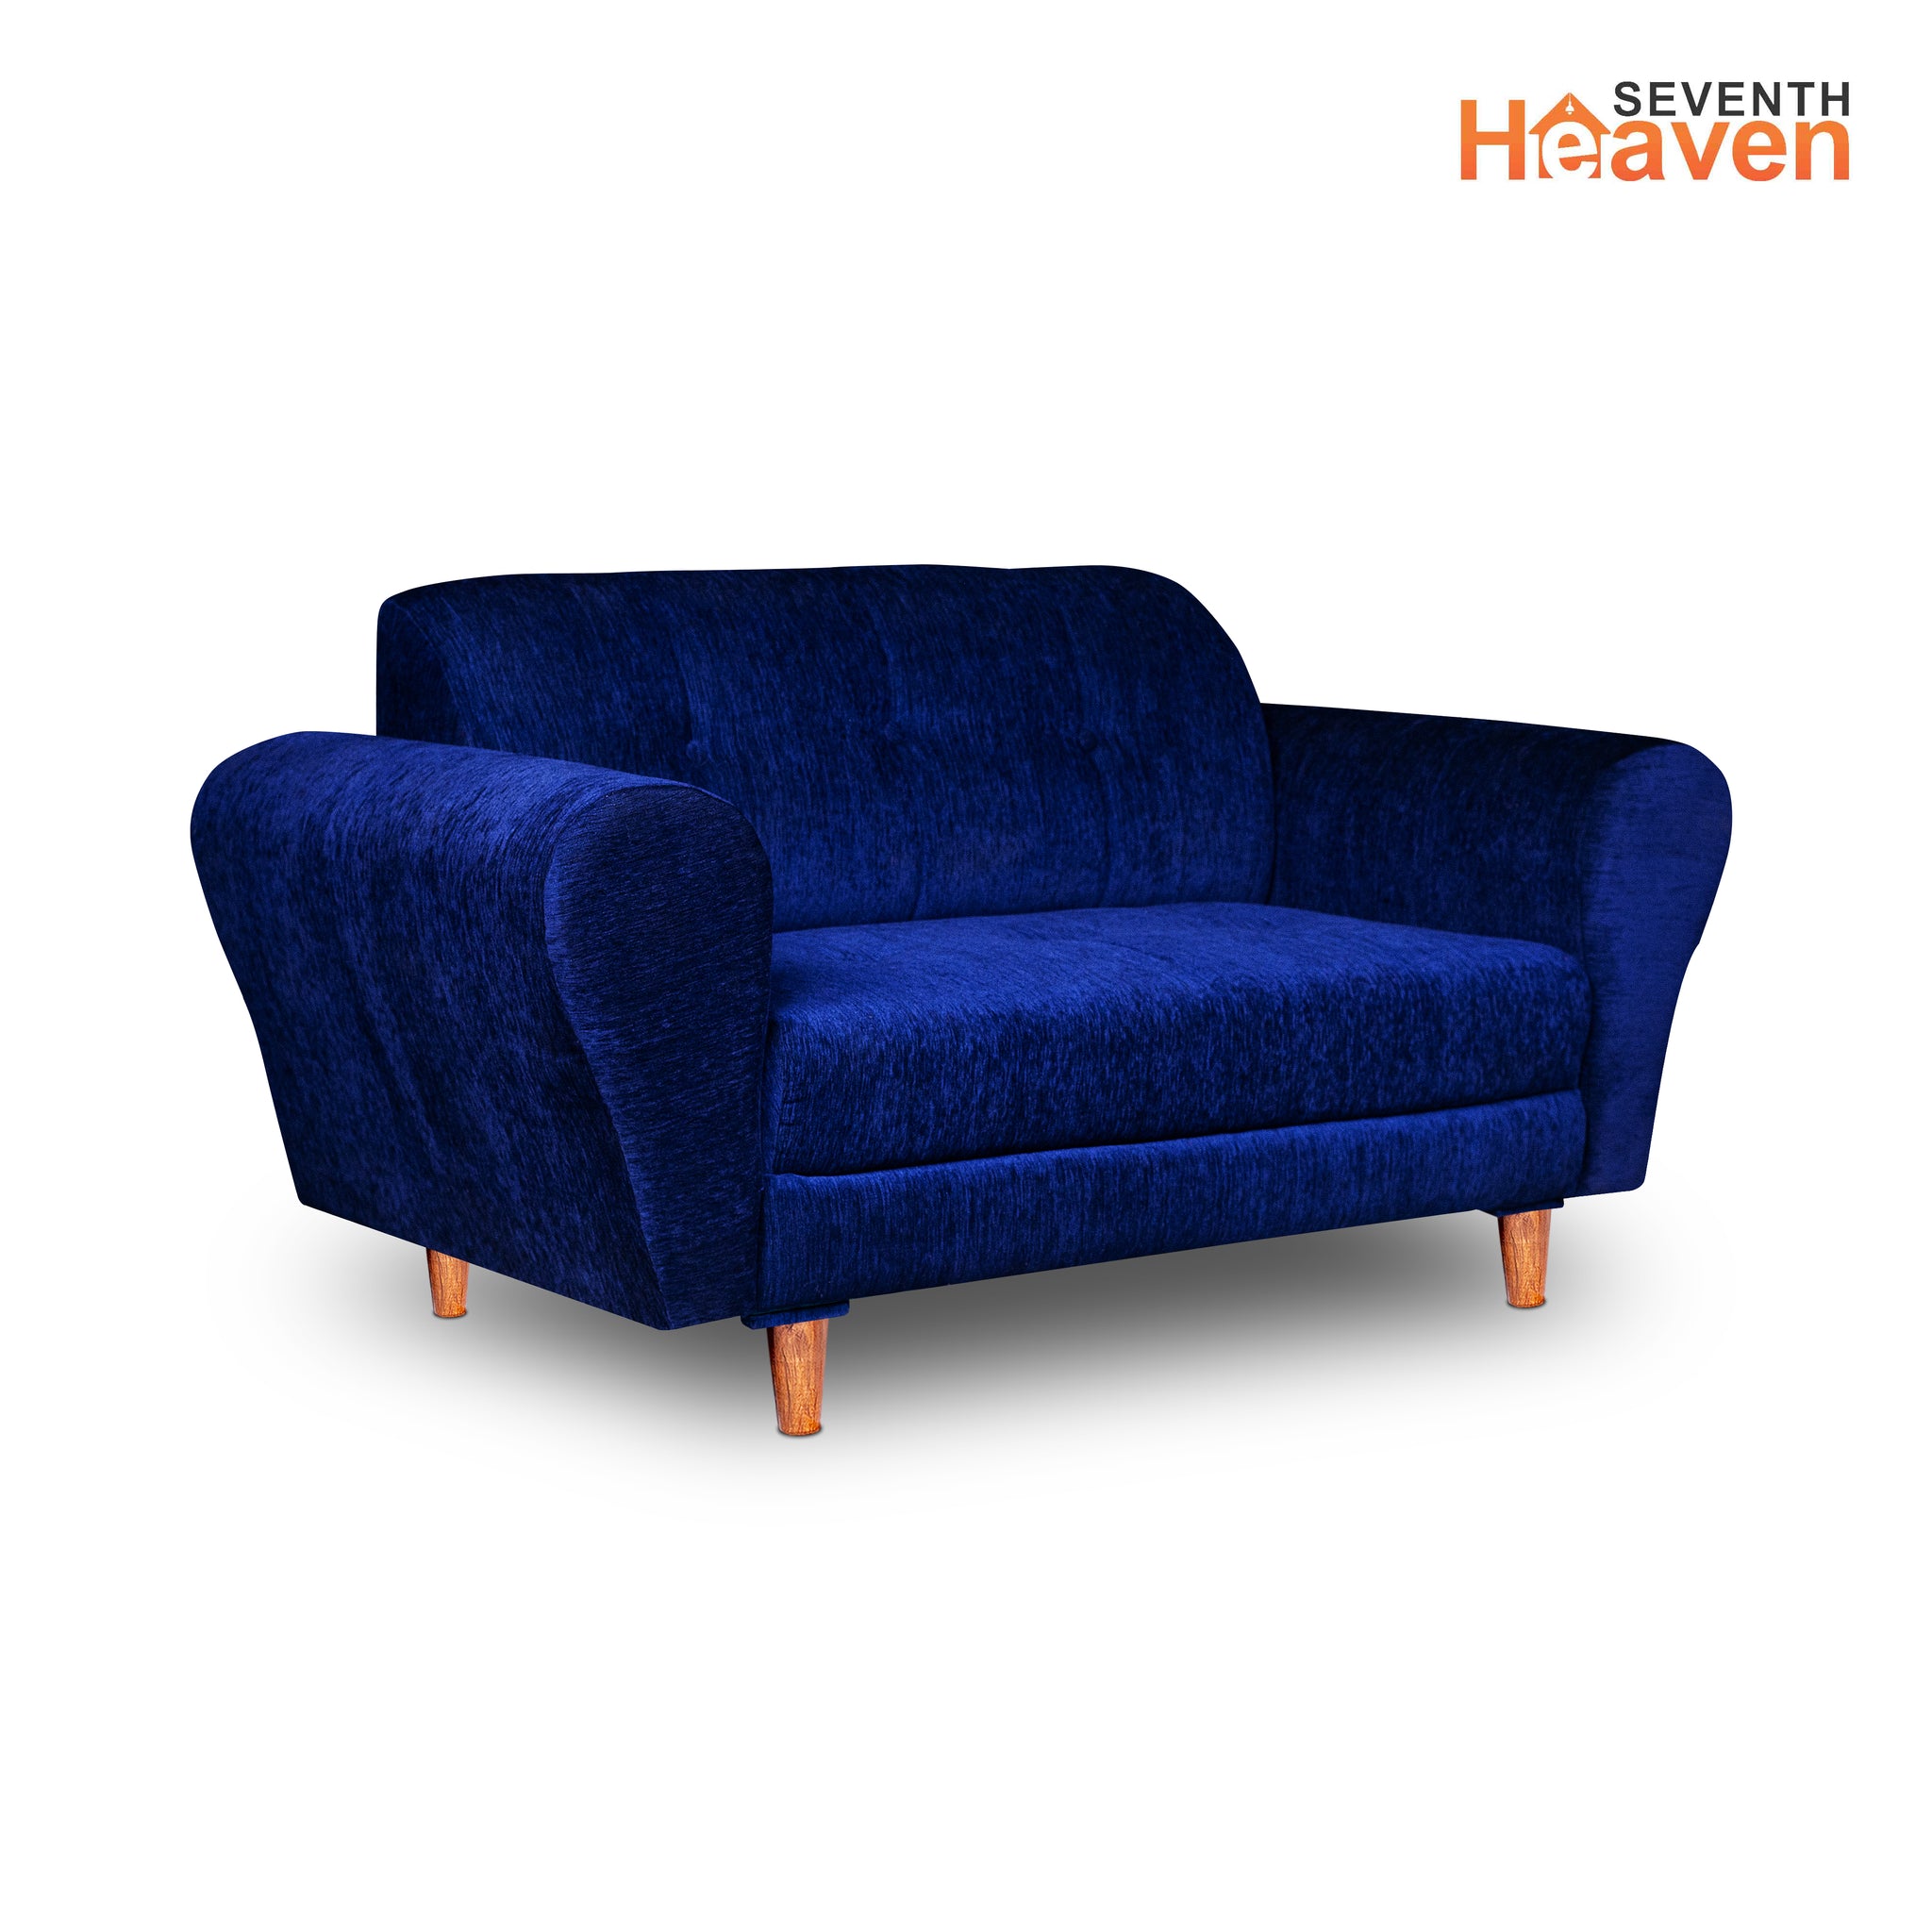 Seventh Heaven Milan 2 Seater Wooden Sofa Set Modern & Elegant Smart Furniture Range for luxurious homes, living rooms and offices. Blue Colour Molphino fabric with sheesham polished wooden legs.